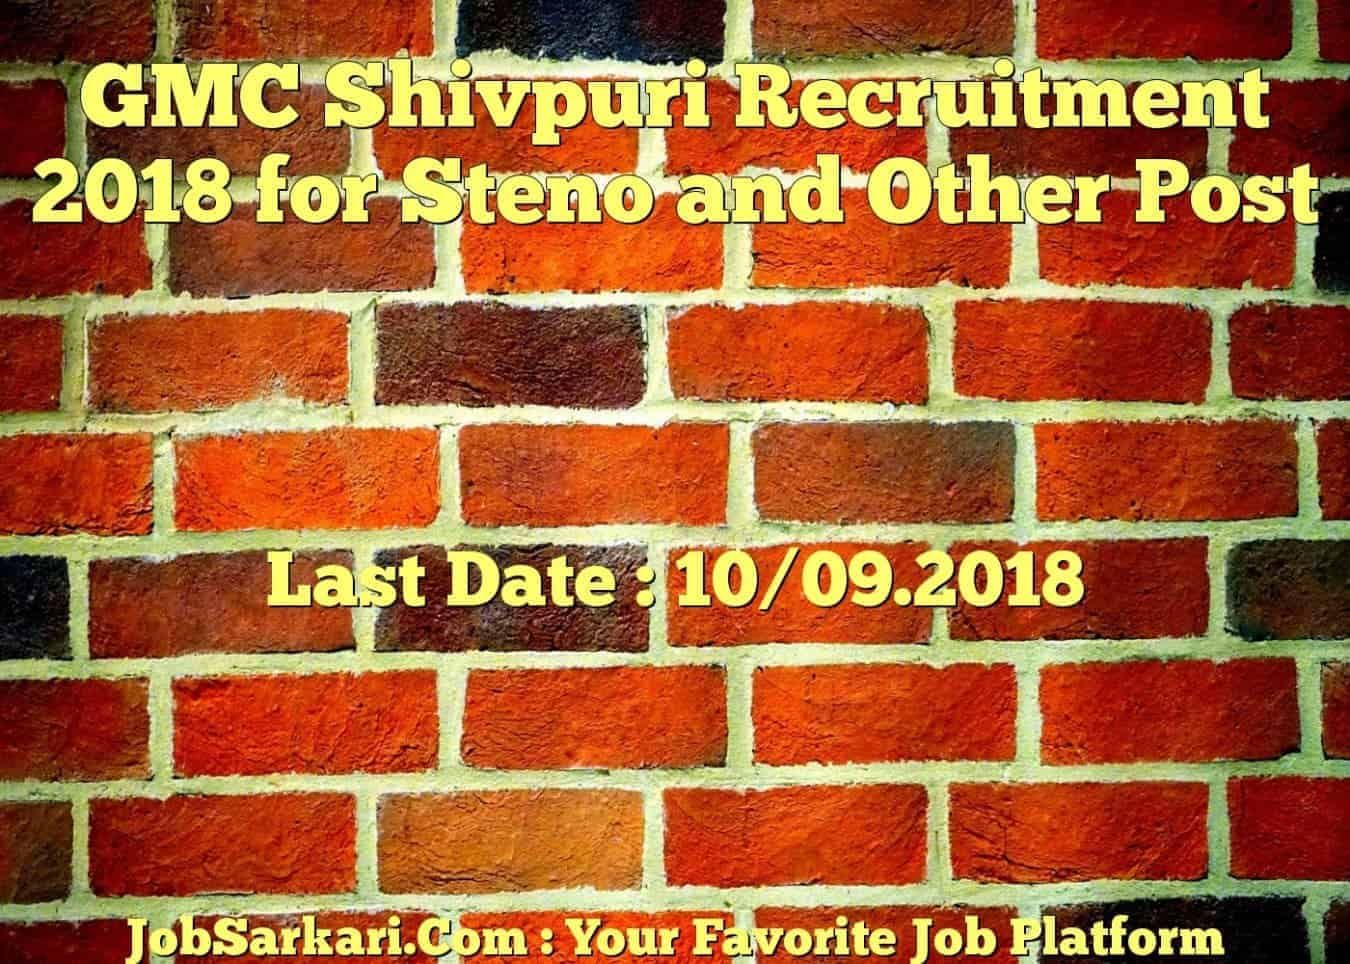 GMC Shivpuri Recruitment 2018 for Steno and Other Post